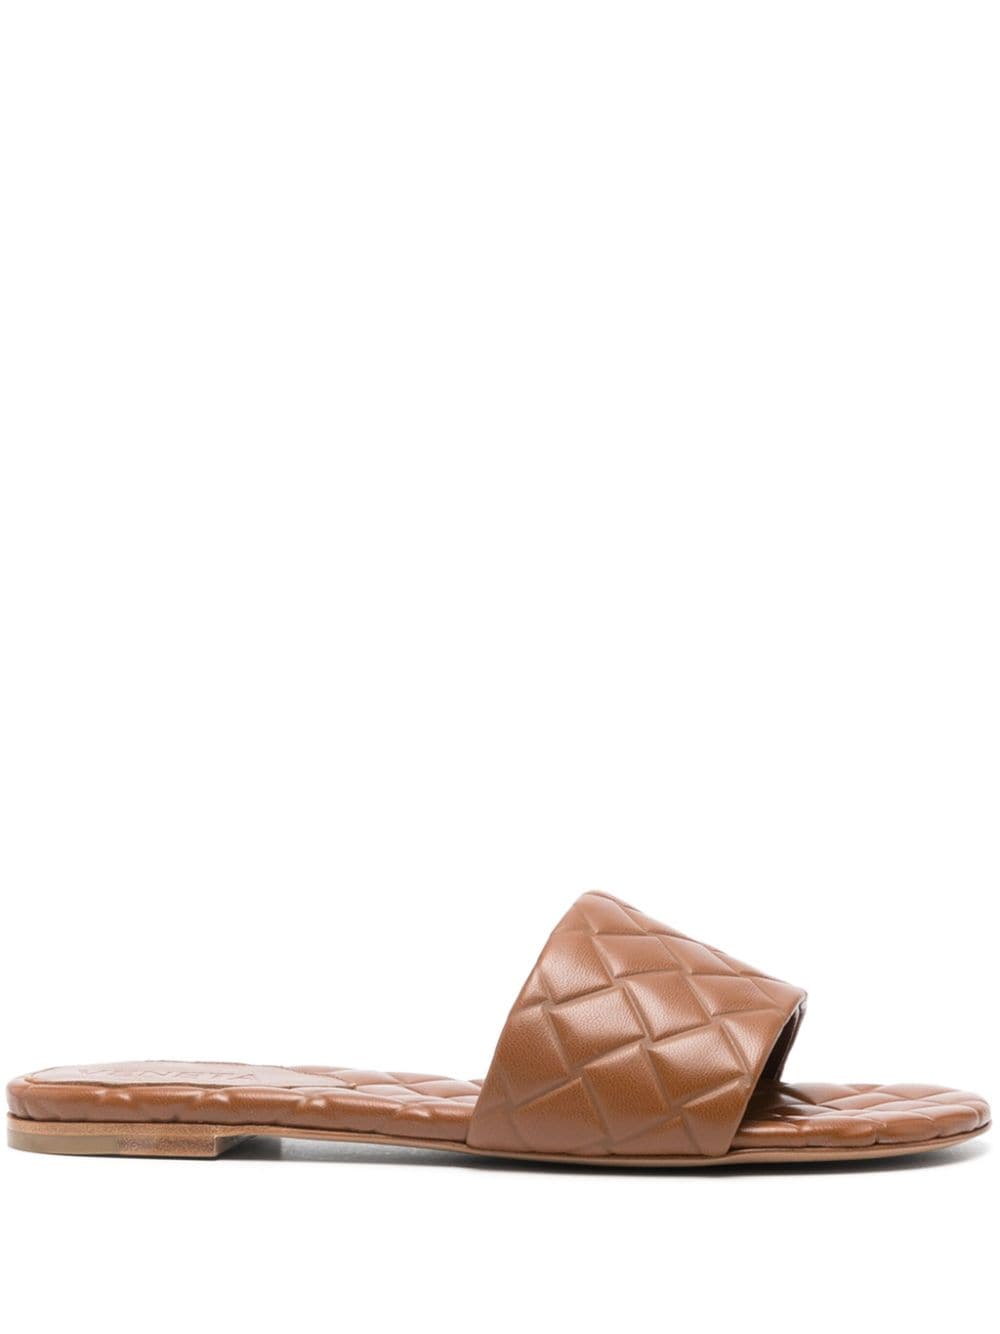 Amy leather sandals